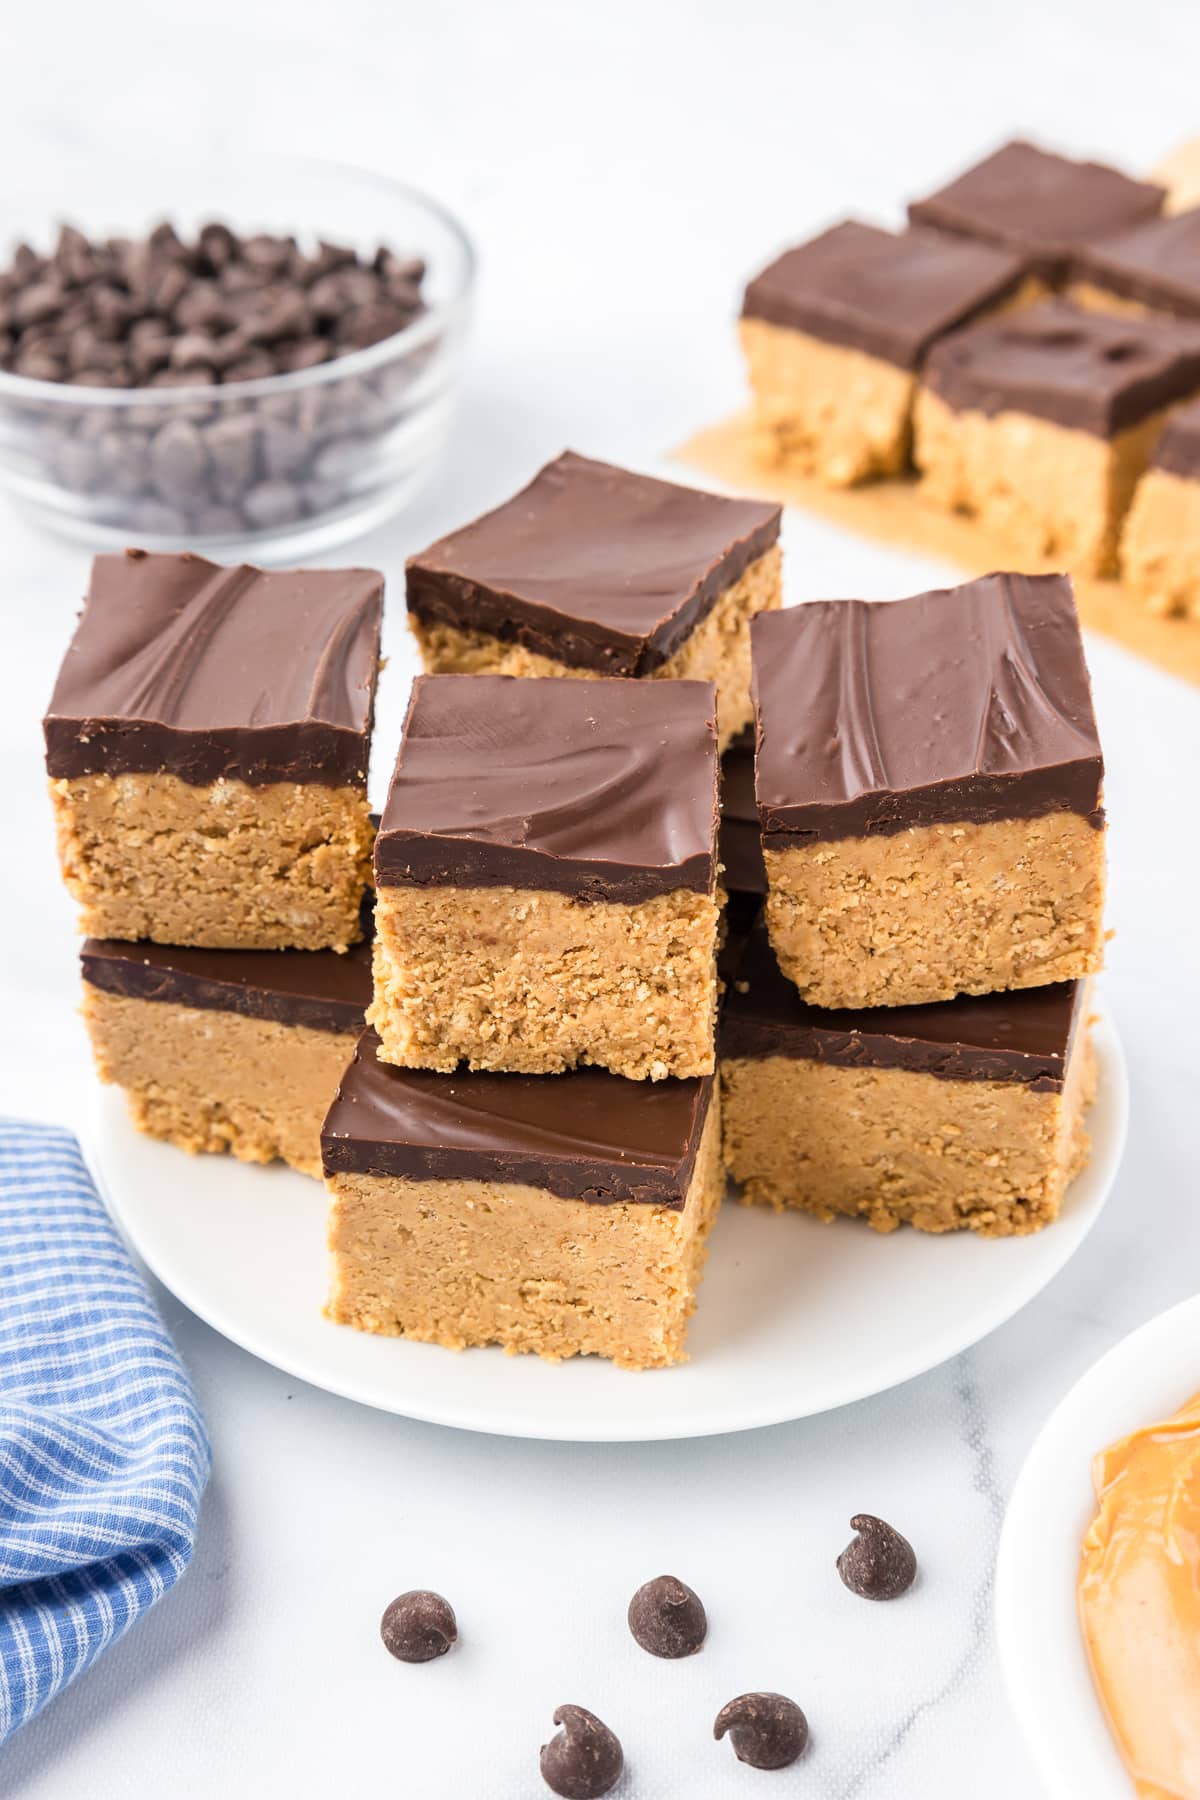 Peanut butter squares topped in chocolate stacked high on a plate.